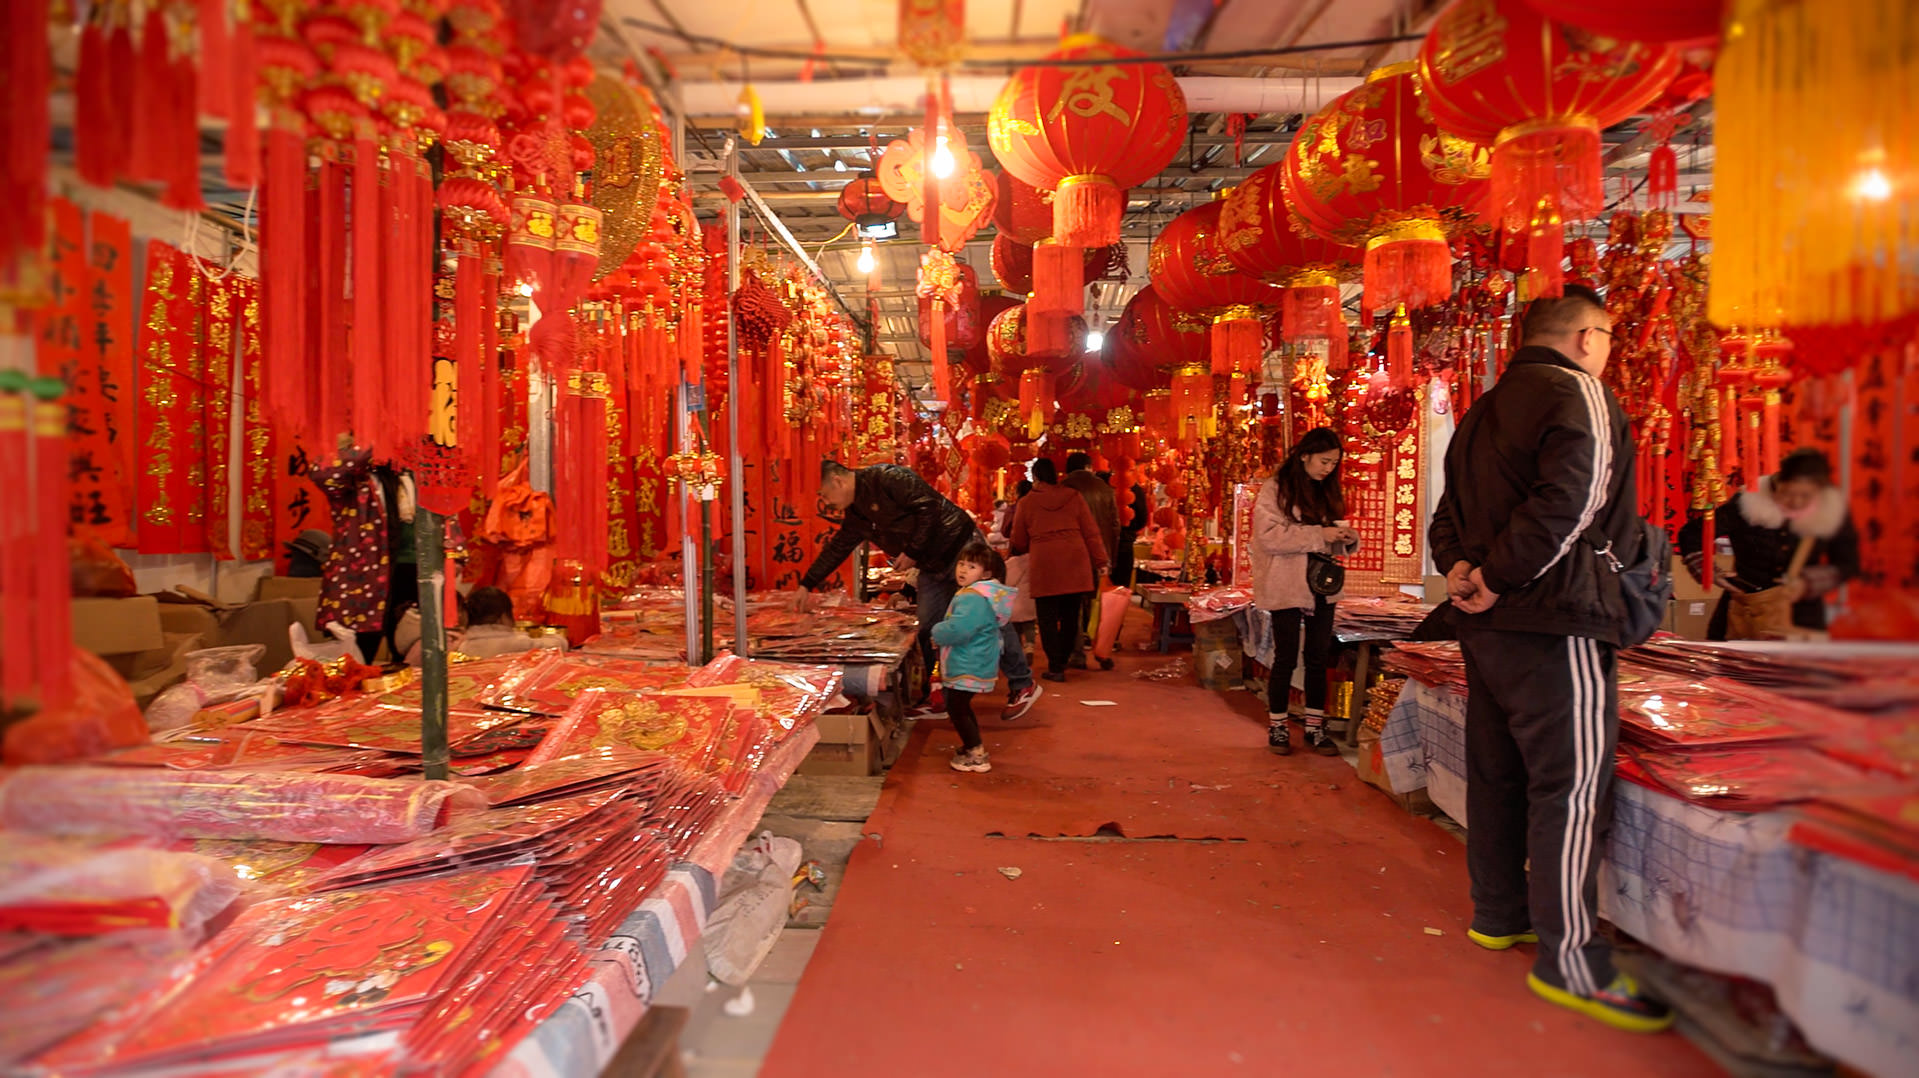 Red Chinese New Year decorations plaster every wall of this underground market